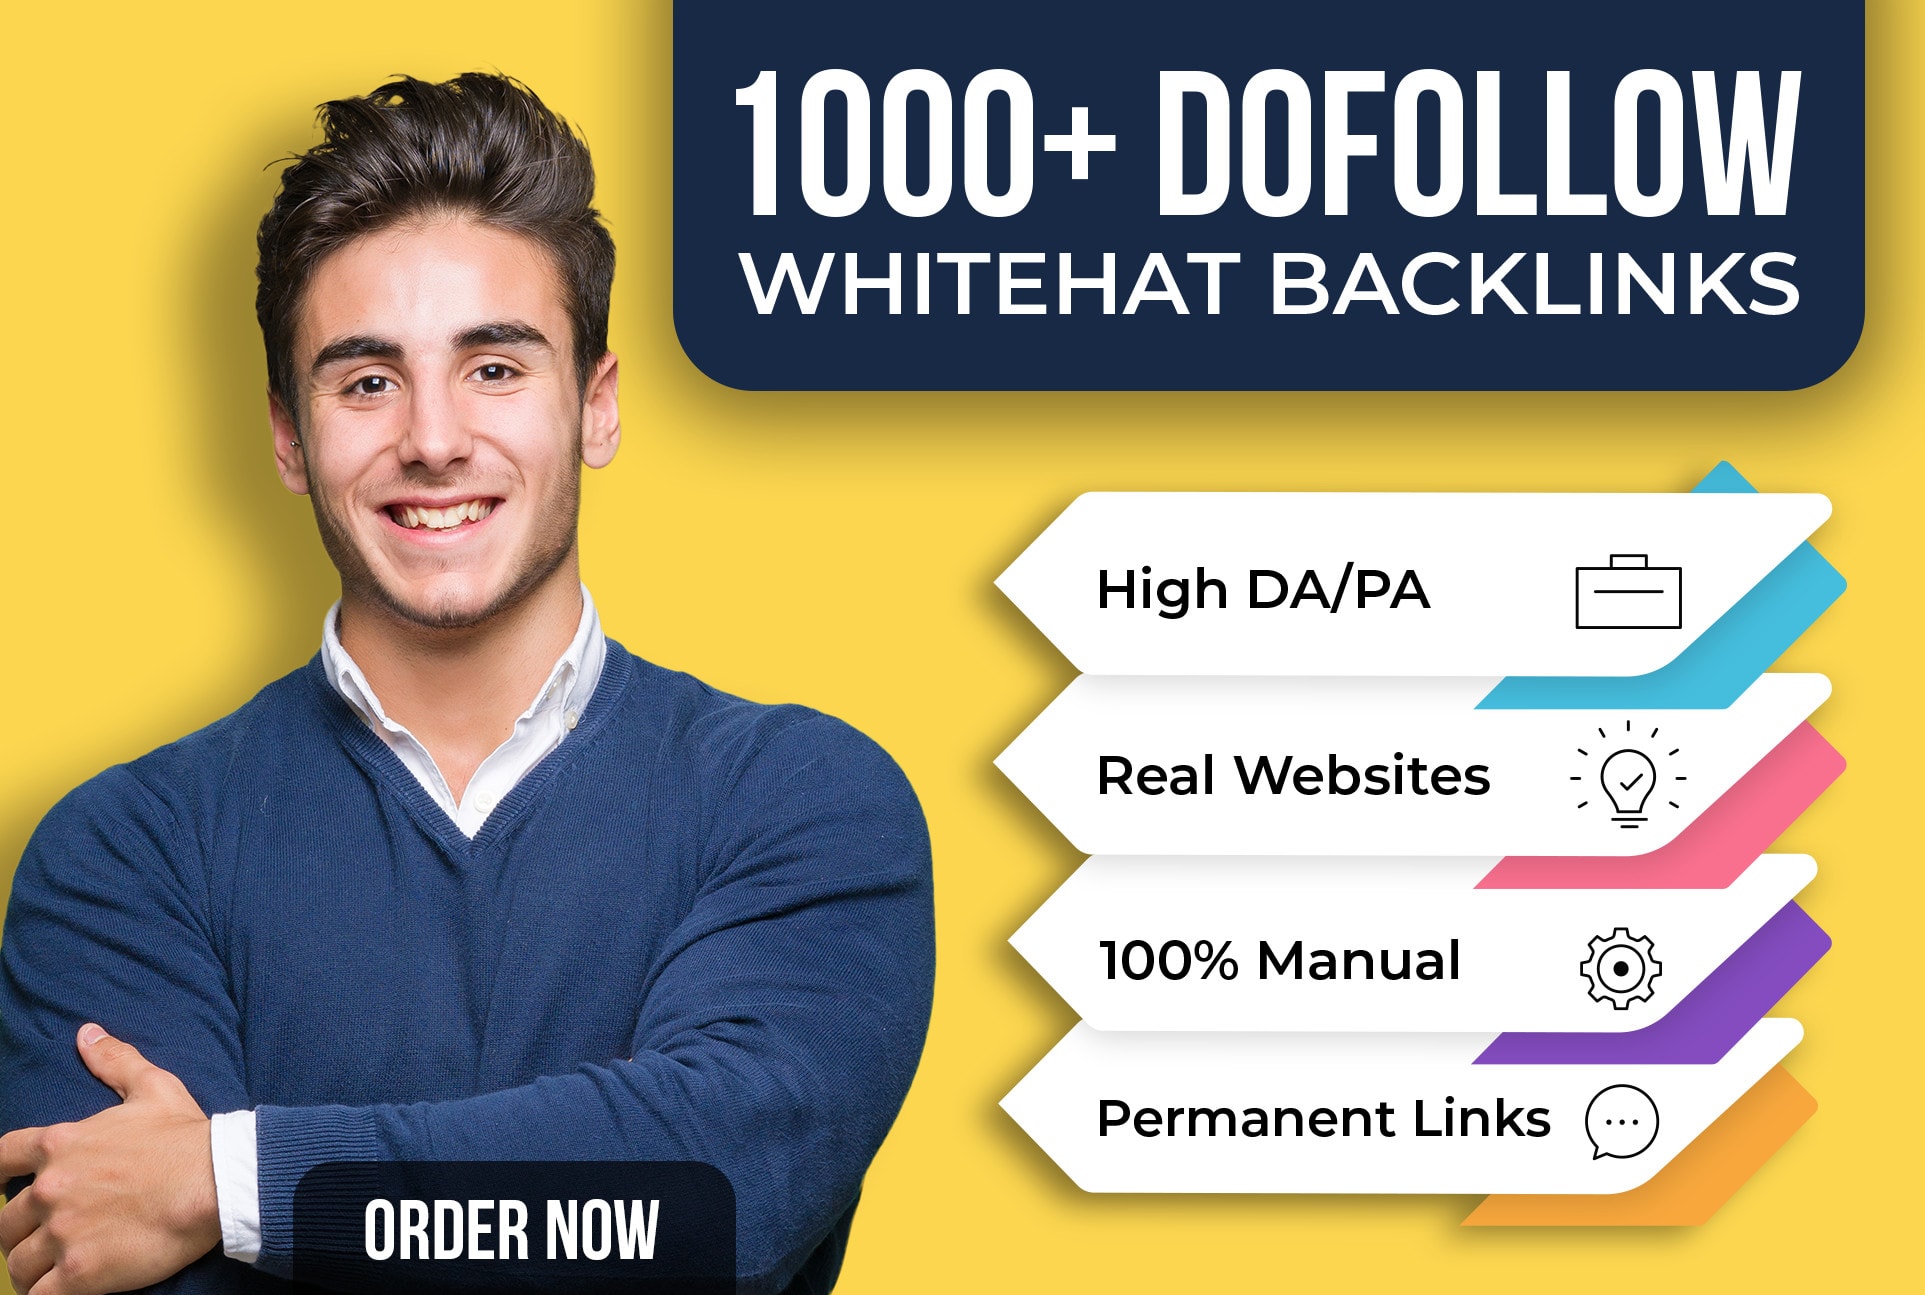 23968Link building 120 High-Quality SEO Dofollow Backlinks From Authority Websites